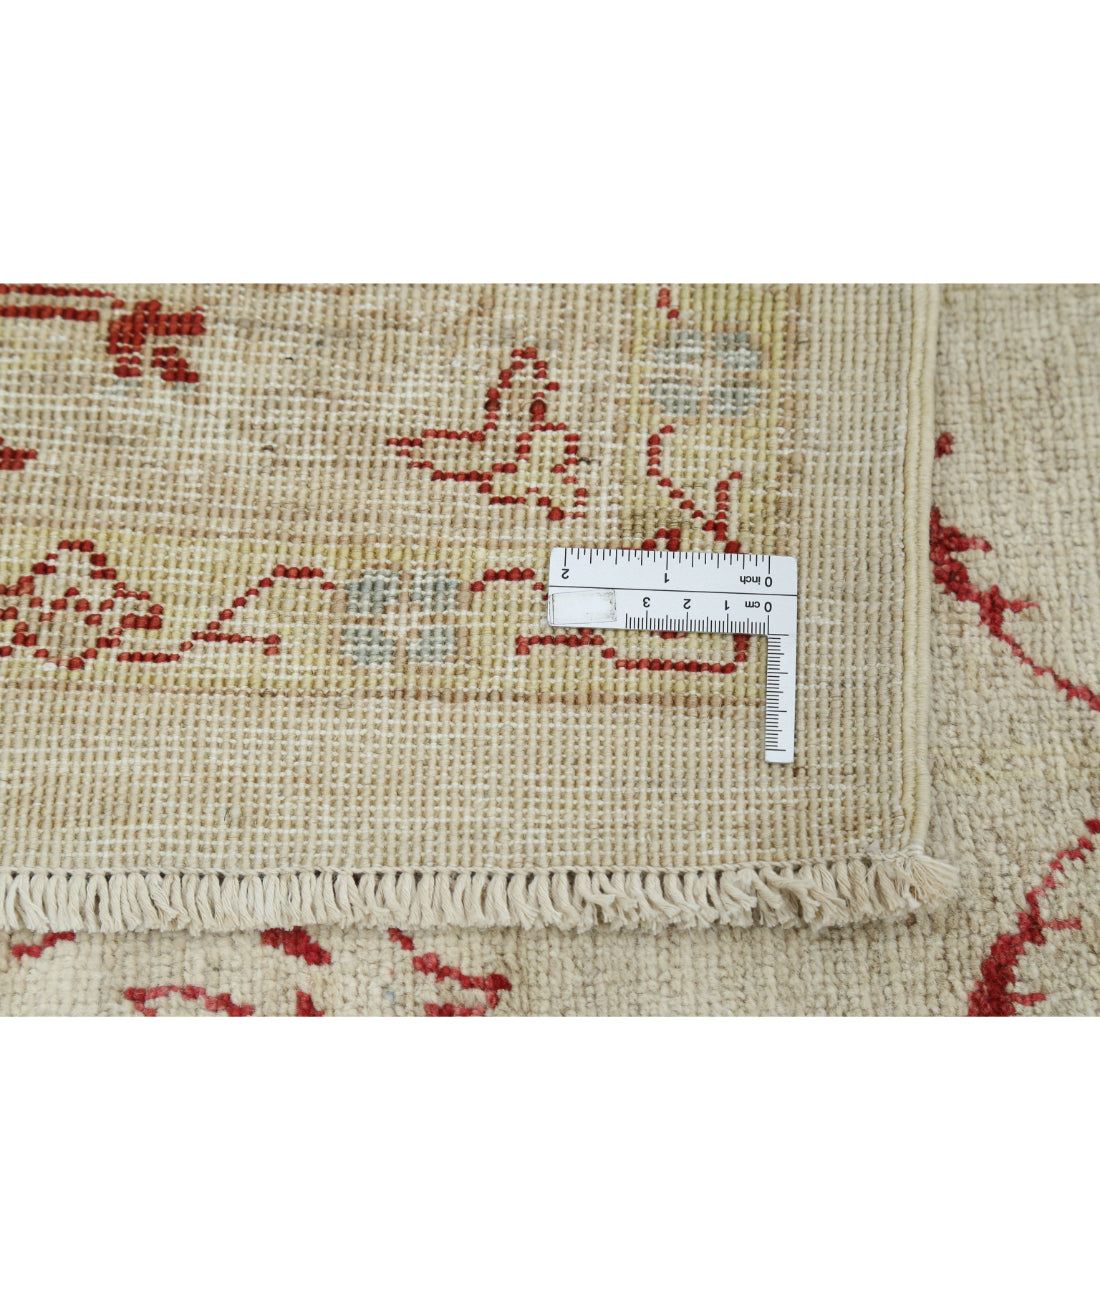 Ziegler 8'4'' X 11'10'' Hand-Knotted Wool Rug 8'4'' x 11'10'' (250 X 355) / Ivory / Ivory